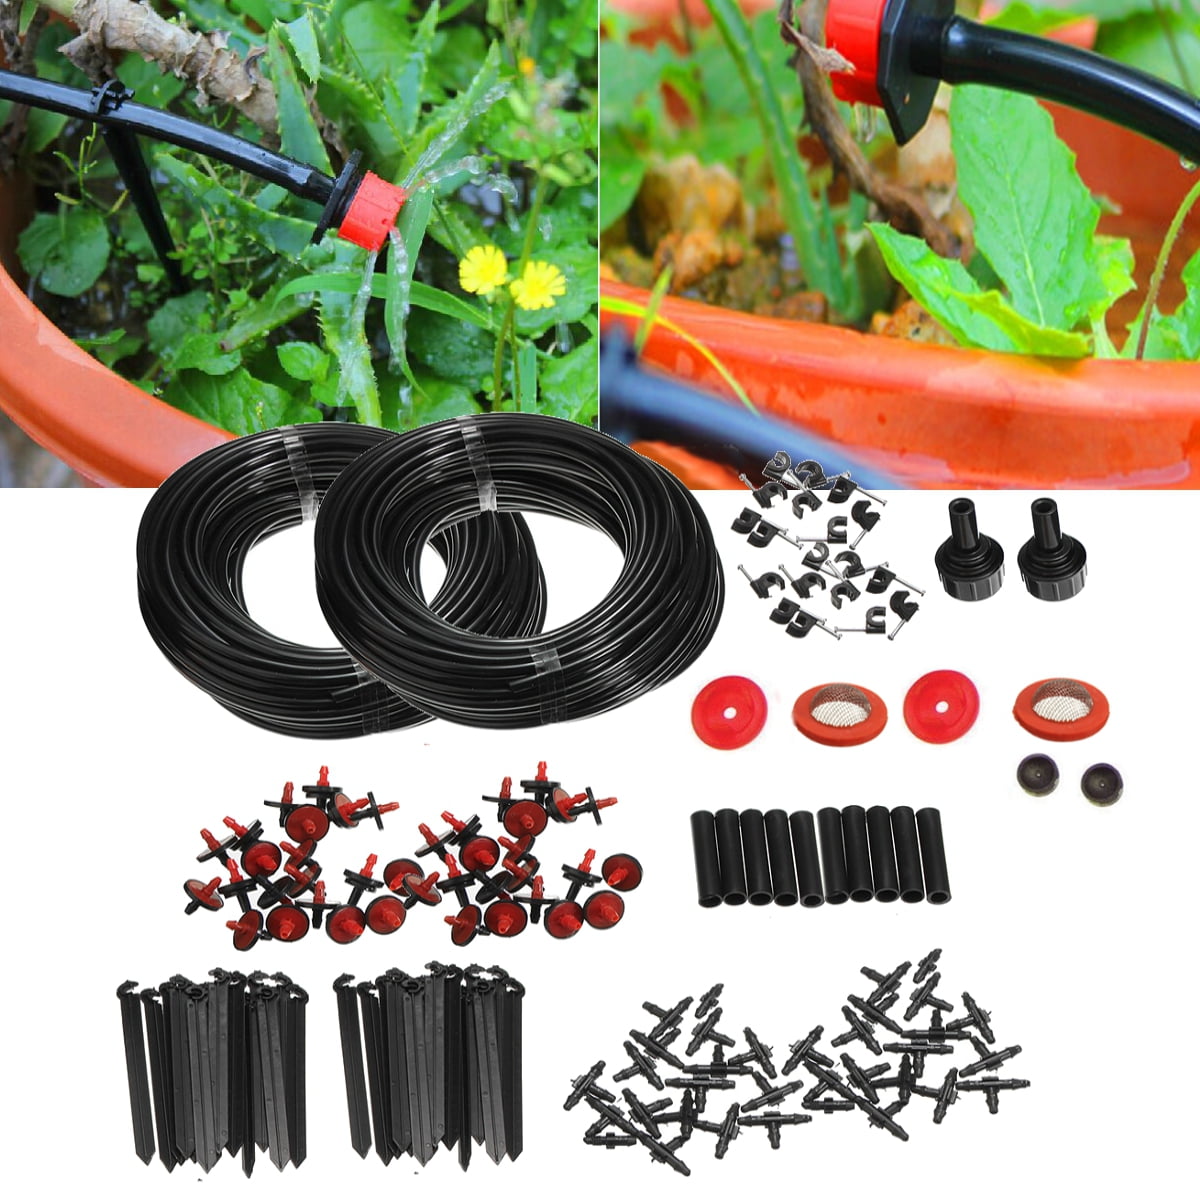 23M Automatic Drip Irrigation System Kit Plant Auto Watering Garden Hose Sets 